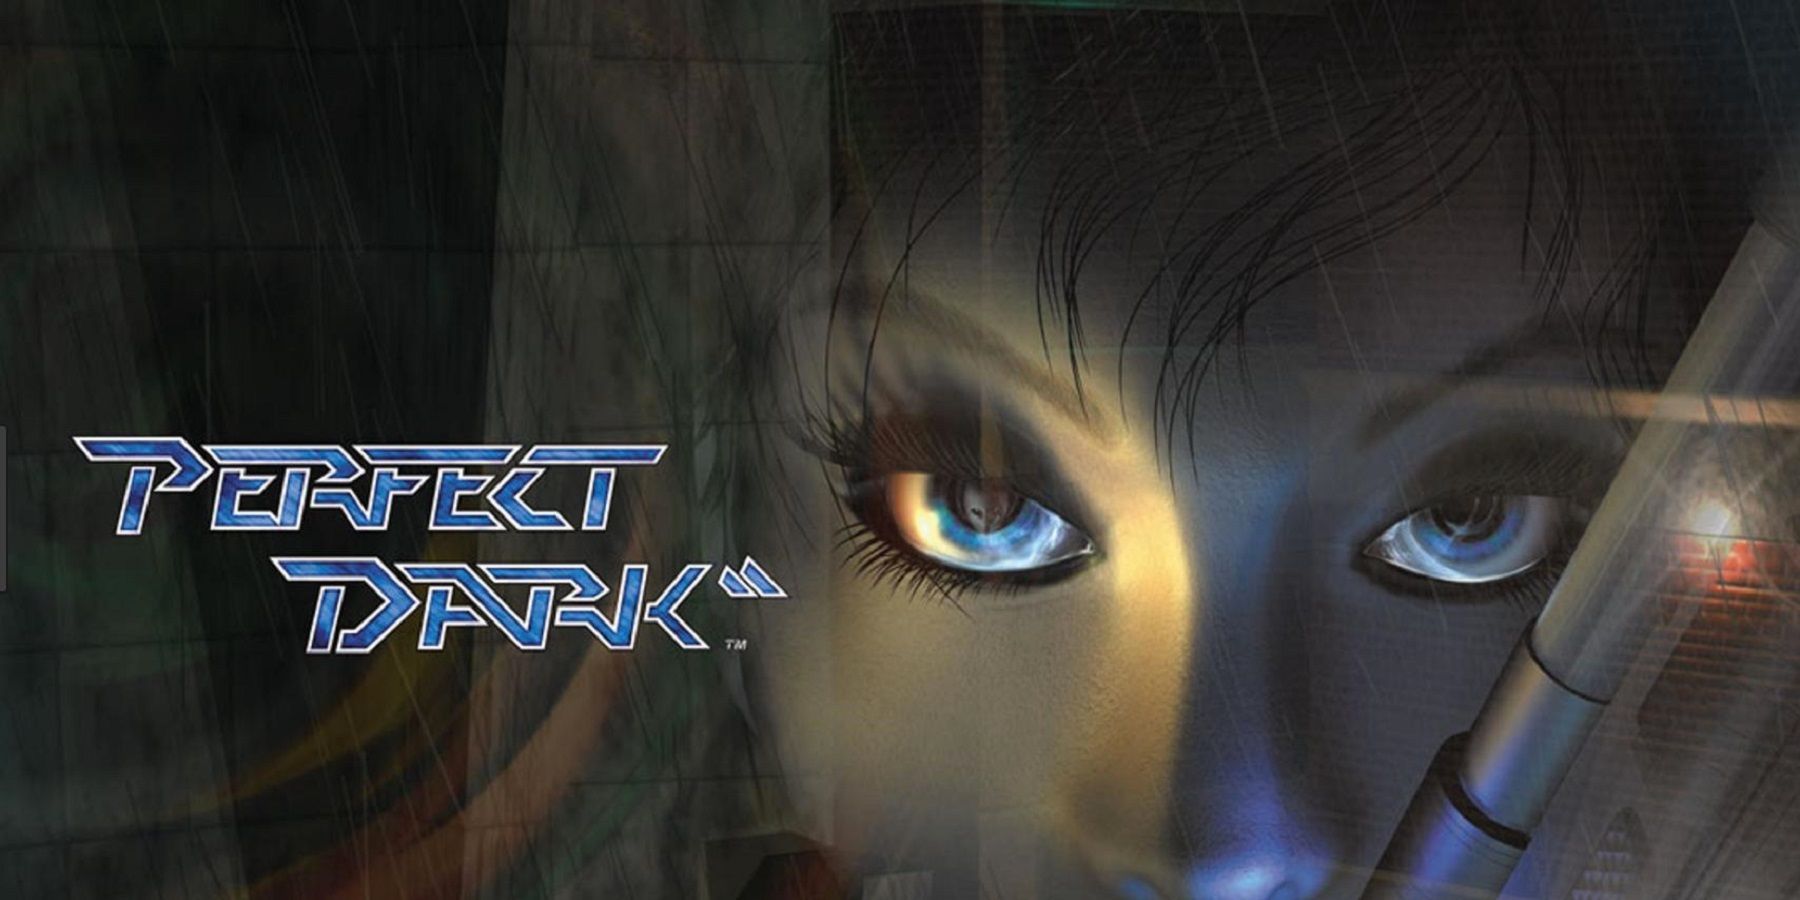 Front cover for the N64 game Perfect Dark showing a close-up of Joanna Dark.